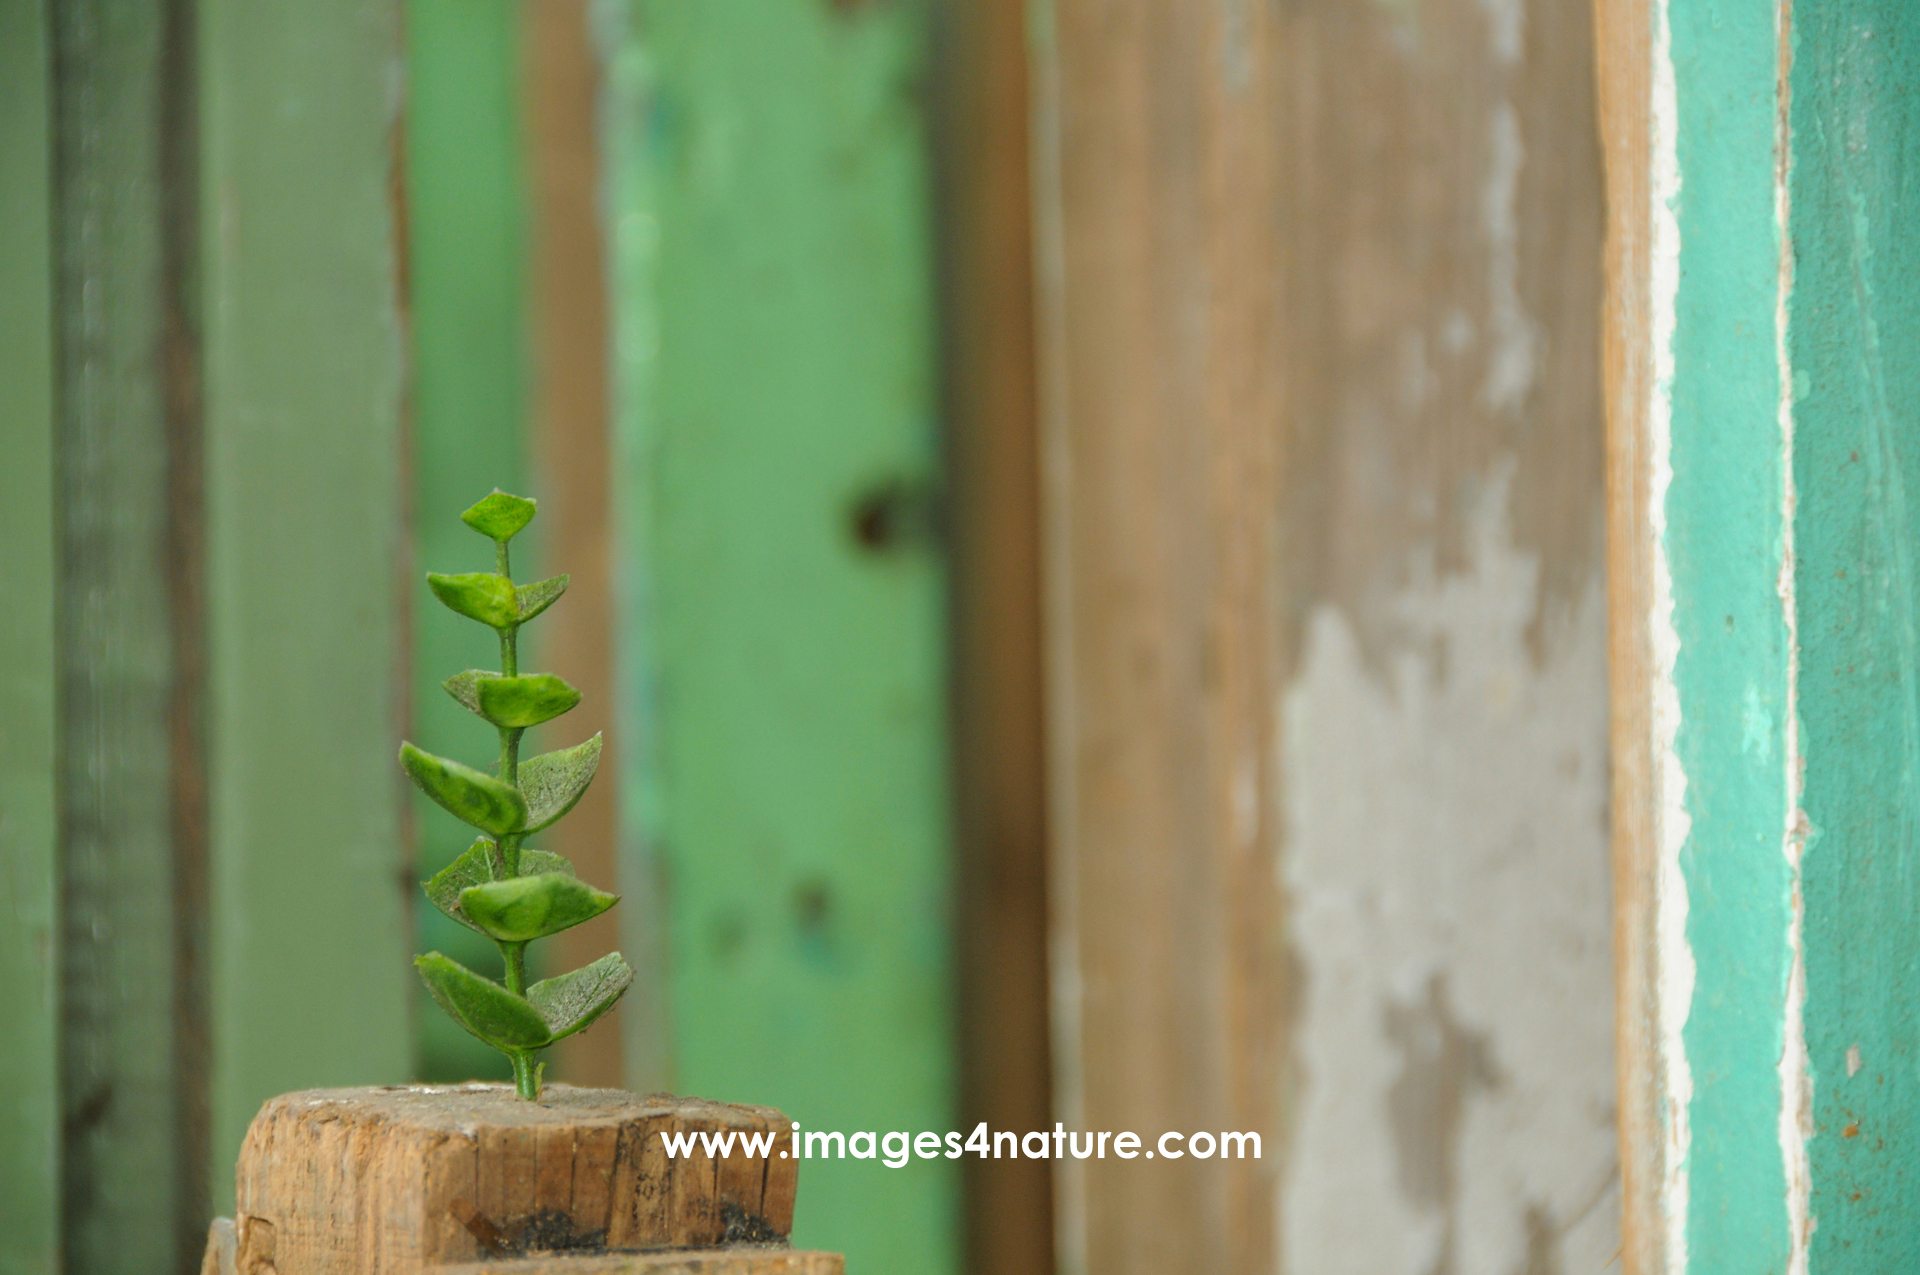 Small green plant growing from a wooden pole